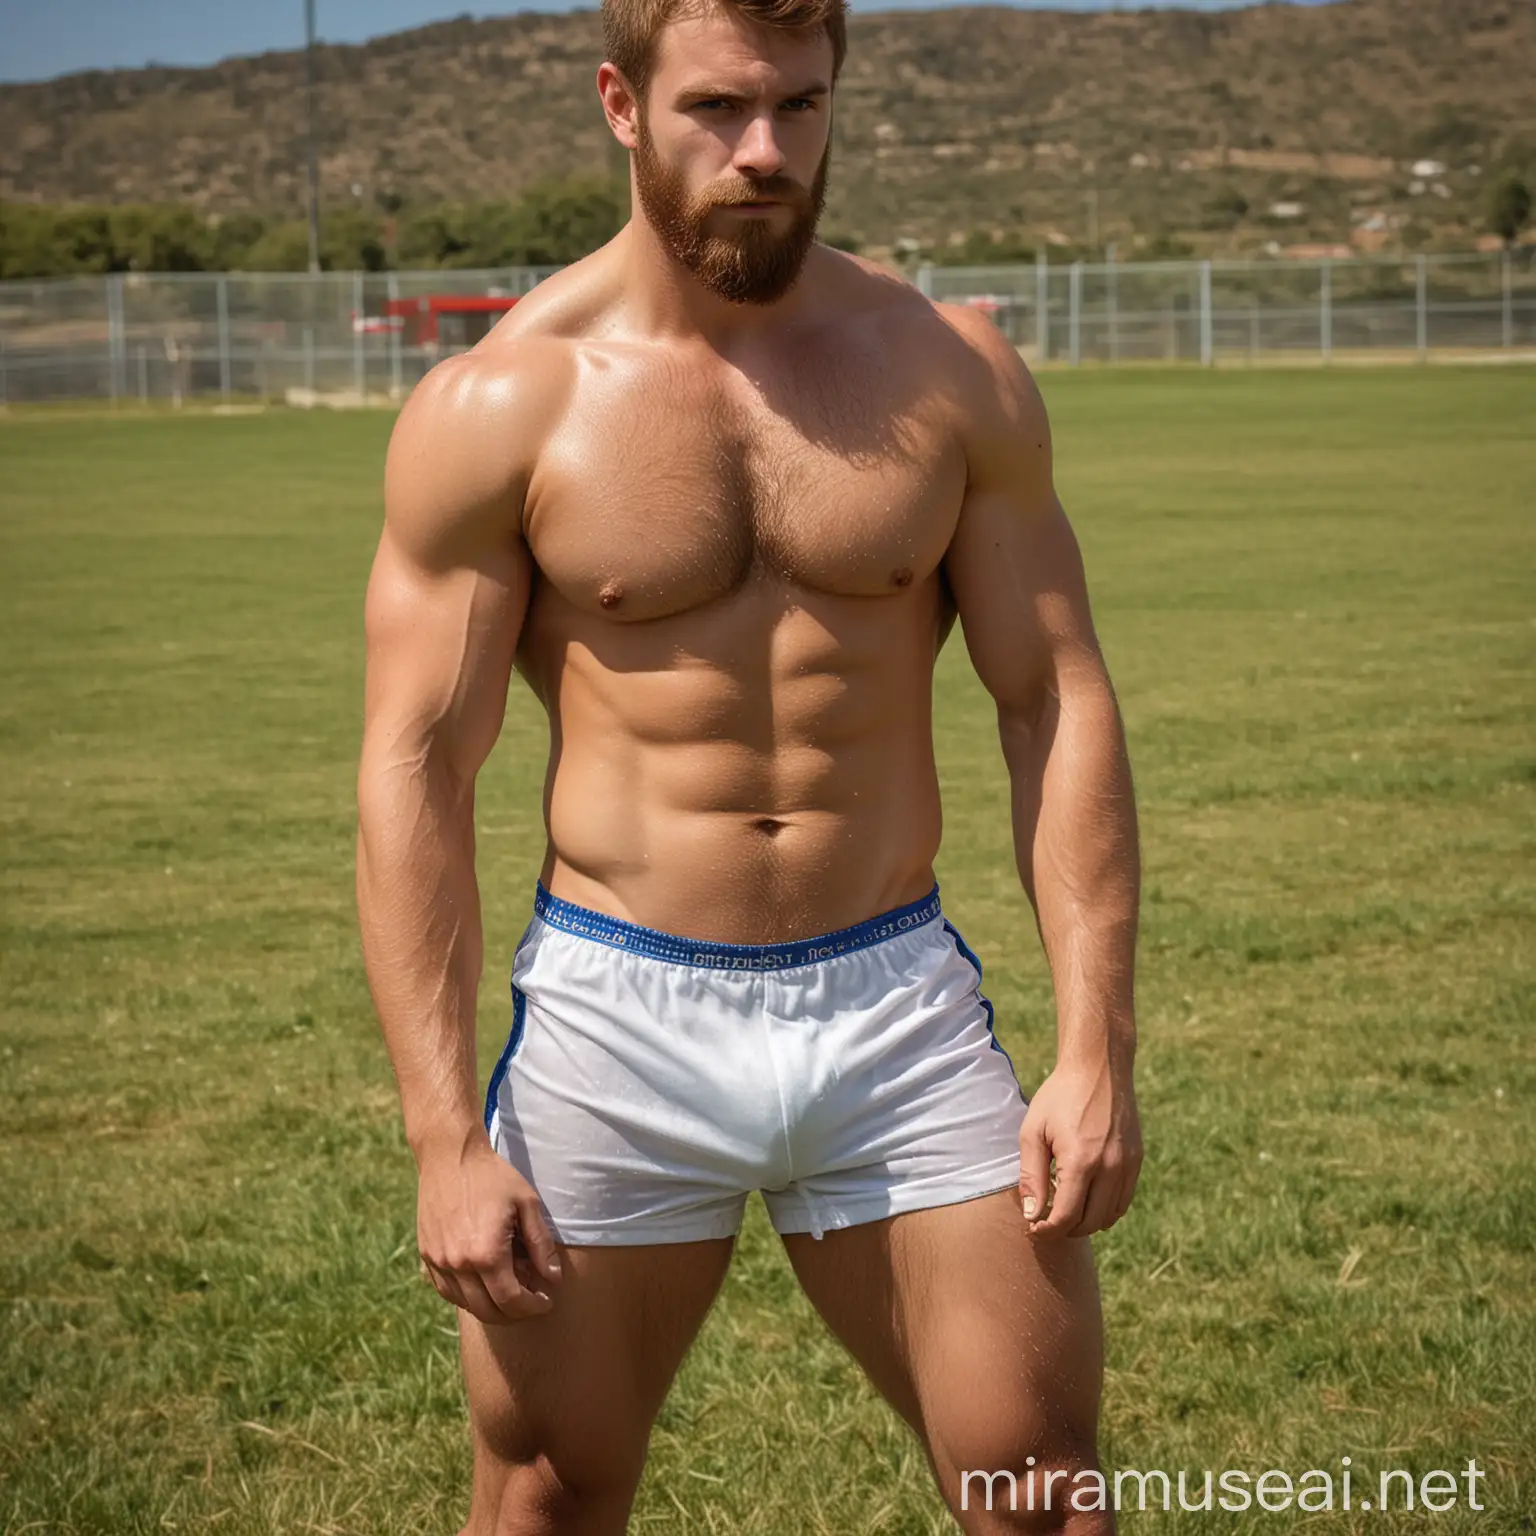 Frontal&side&back views, full body shot, beefy Finish javeline thrower, chestnut hair, short beard, 193 cm tall, 24 year old, muscle man, extremely hairy torso, extremely hairy forearms, extremely hairy abdomen, extremely hairy legs,  low rise white&blue lycra shorts with protective hard cup inside, track field, rainy